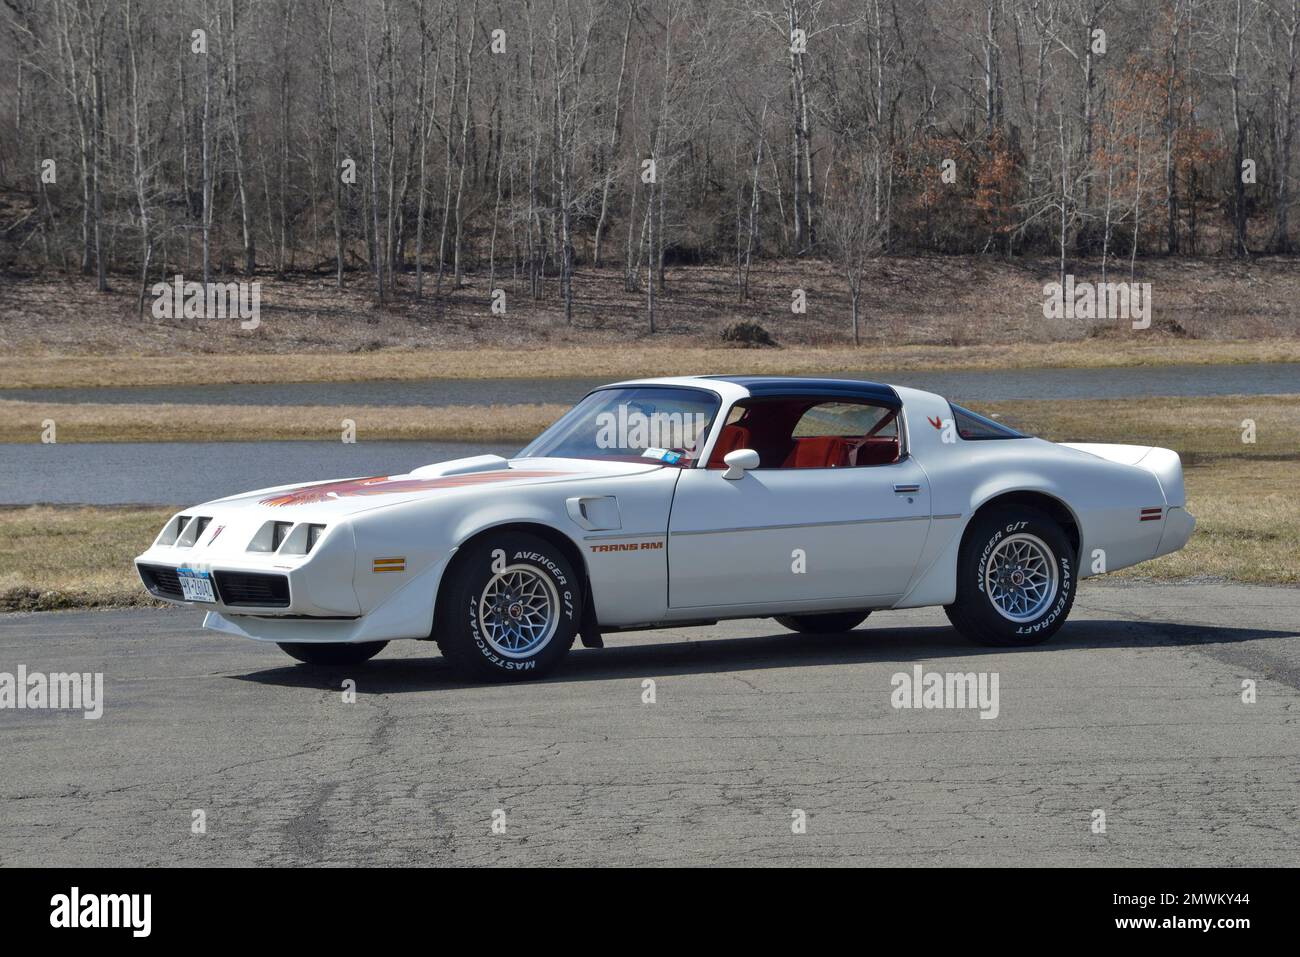 White 1979 Pontiac Trans Am in a high-three-quarter-front view against winter trees in bright sun. Stock Photo